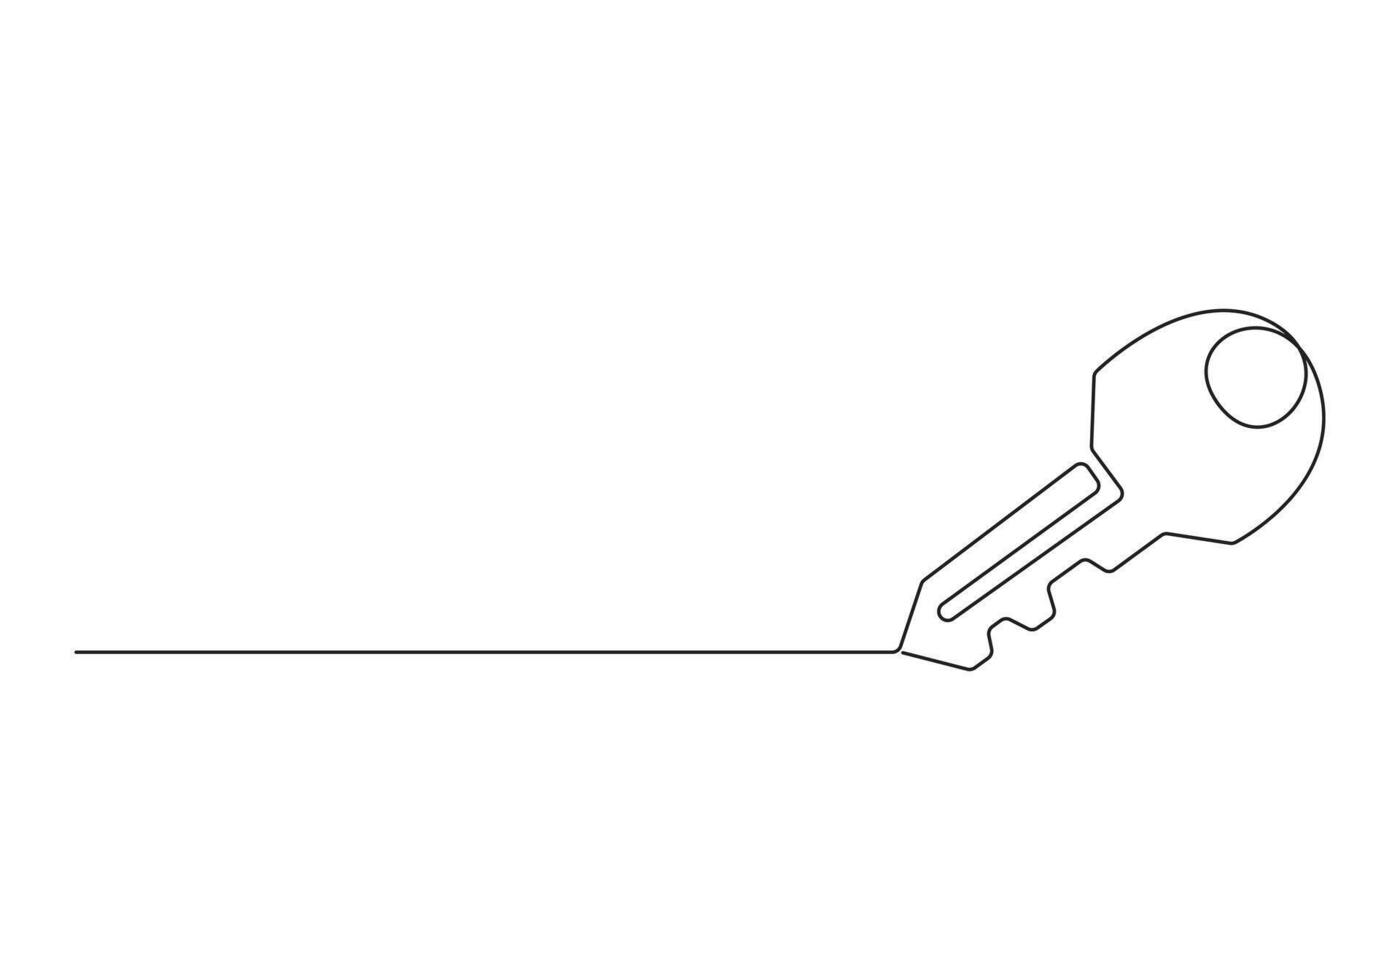 Continuous one line drawing of key pro illustration vector